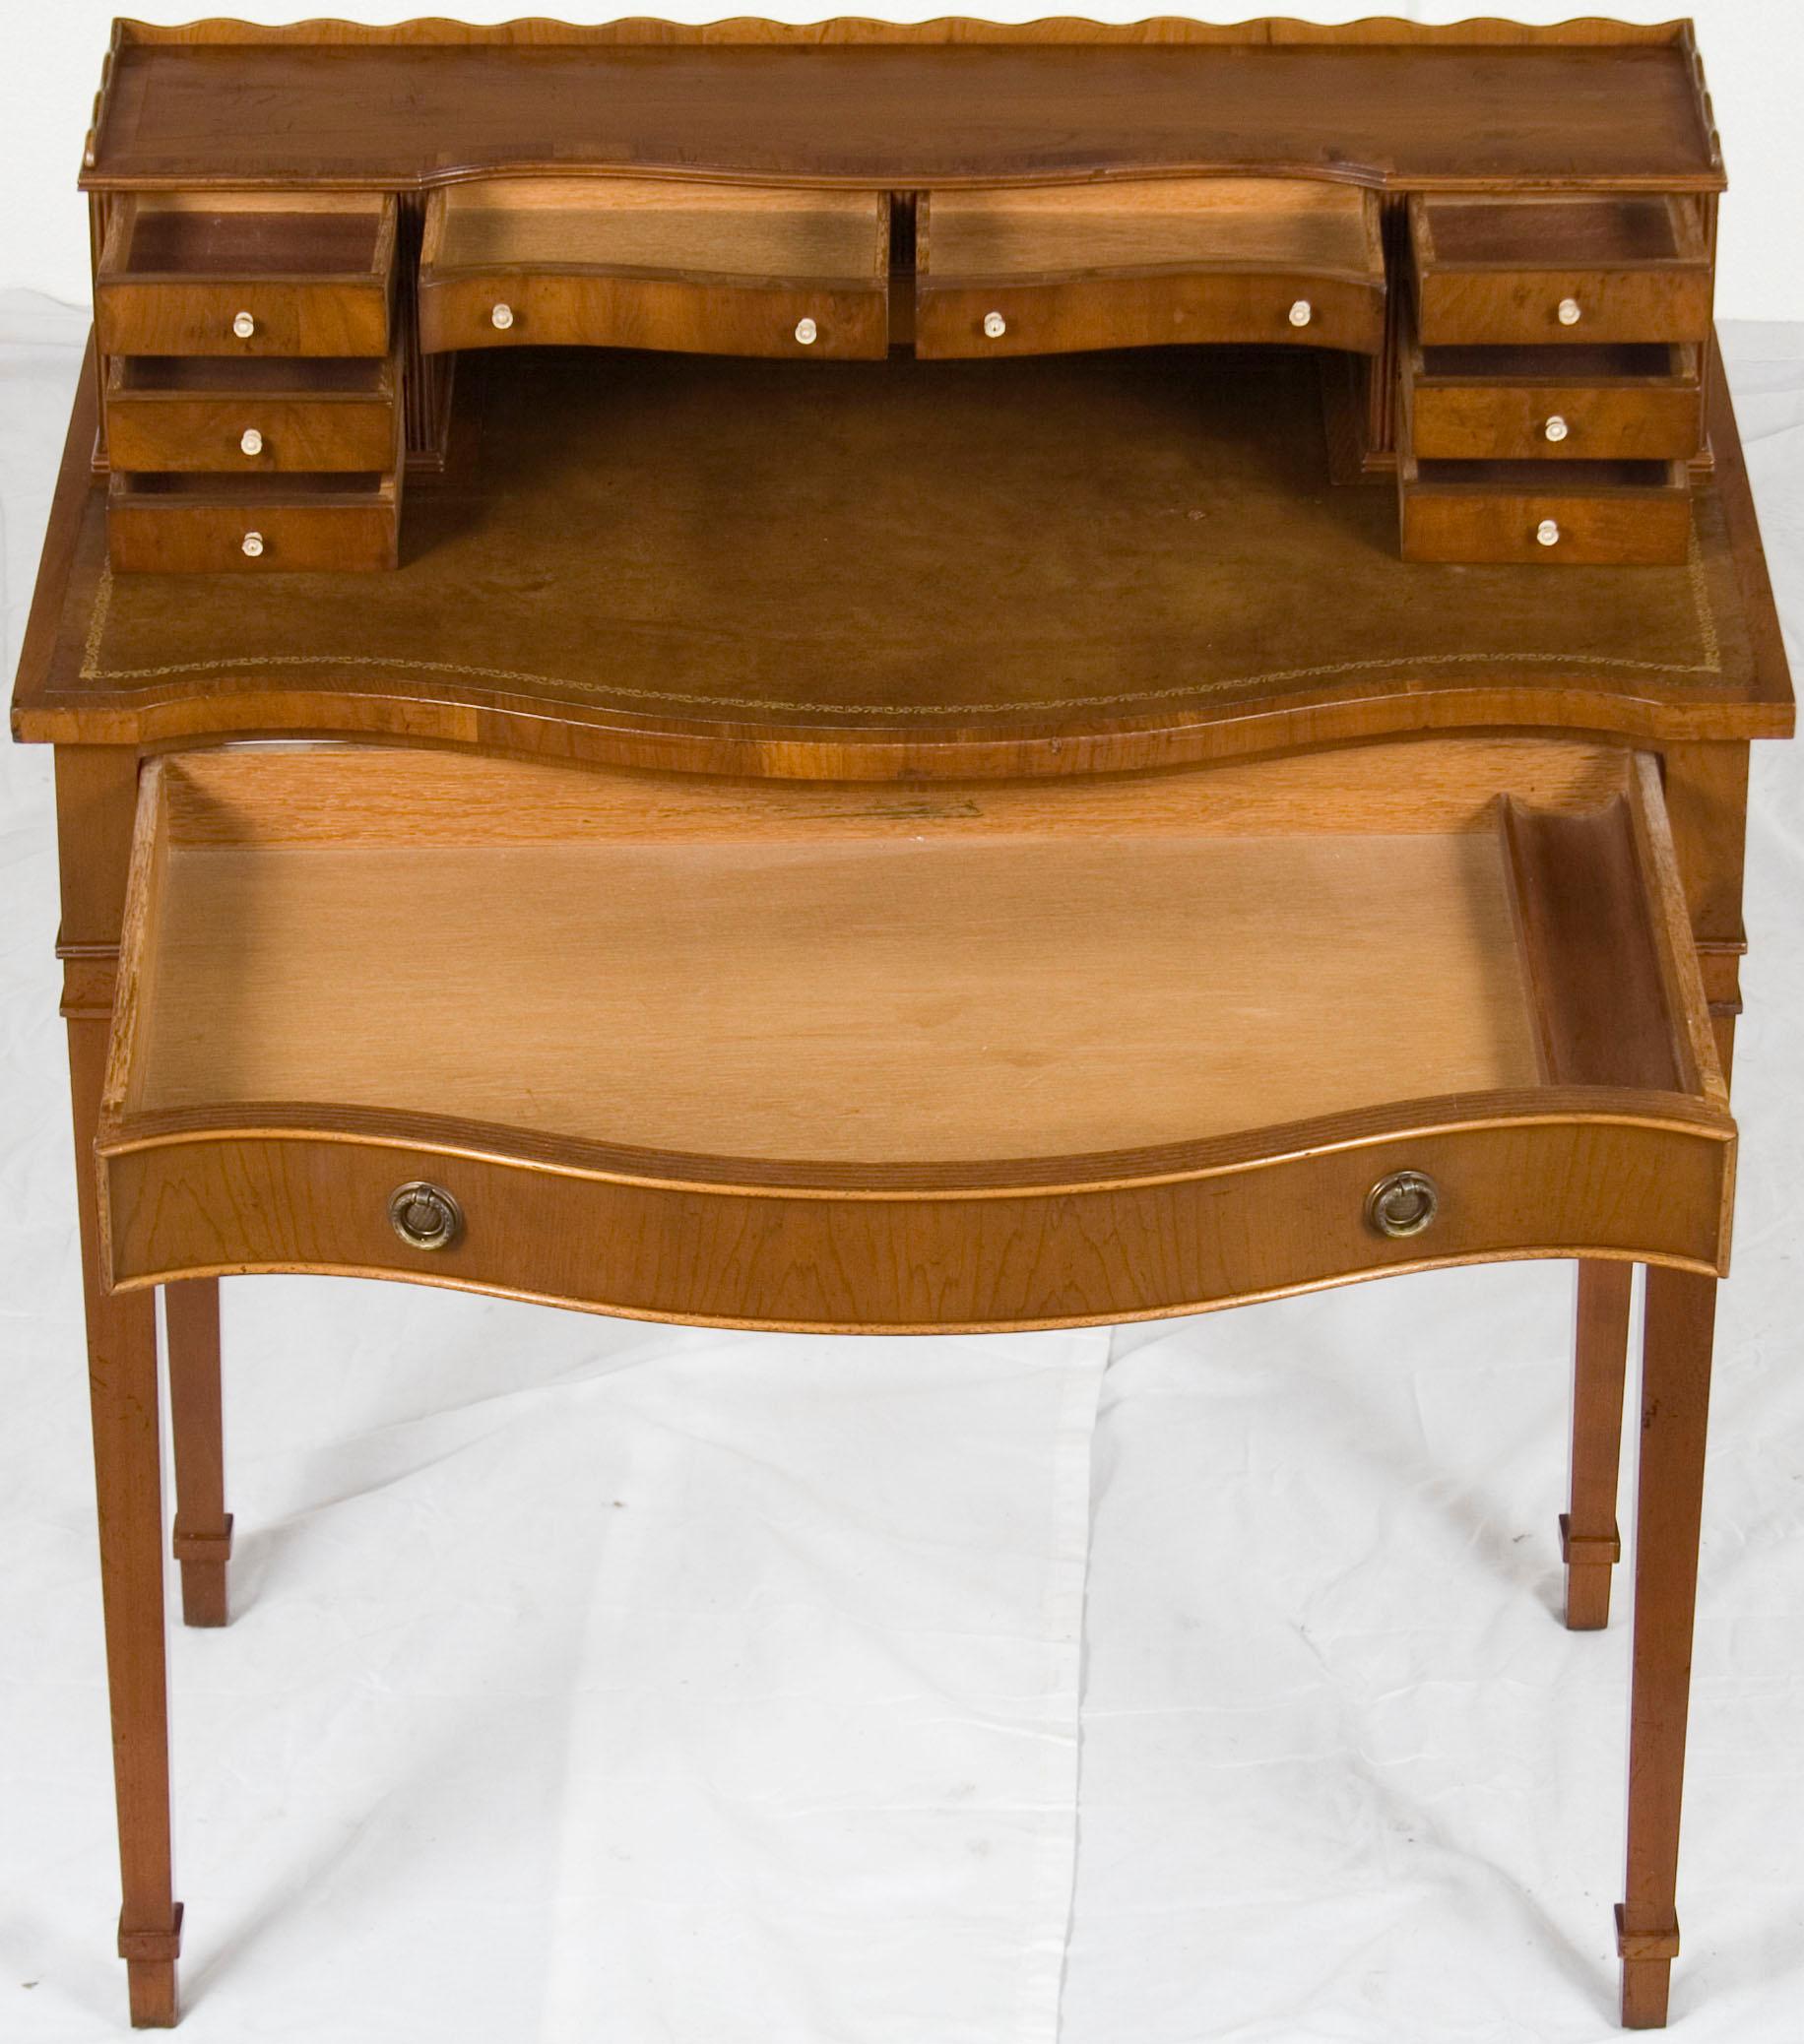 Fresh over from England, this small side desk provides function in tiny spaces. Probably made sometime around the year 1960, this piece works equally well in both the office, bedroom, or living room. Whether used to compliment an existing desk or